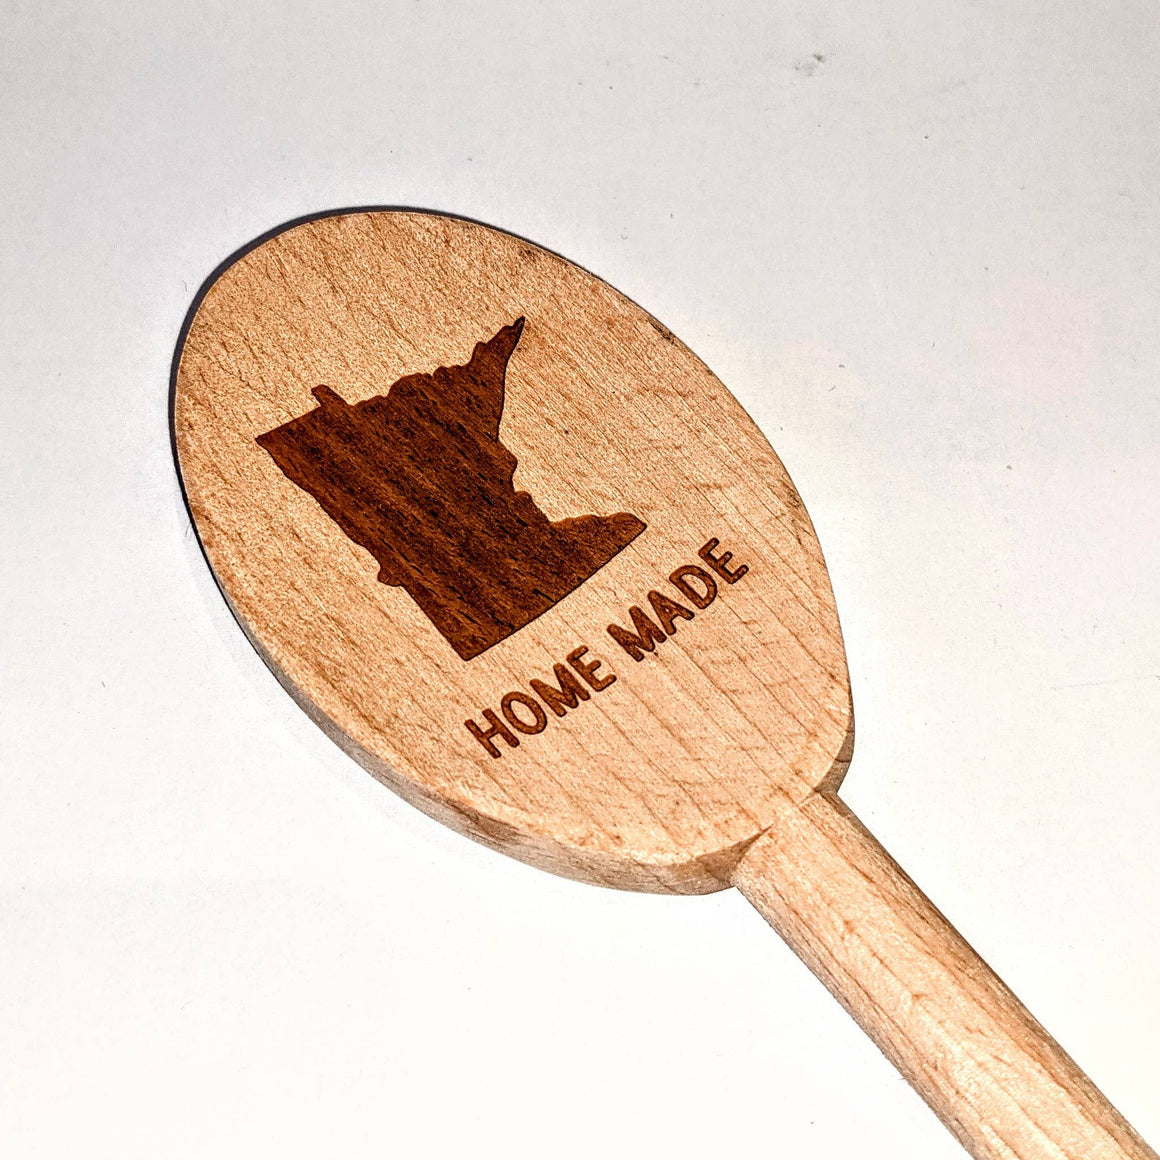 Wooden Spoon - Homemade - Northern Print Co.